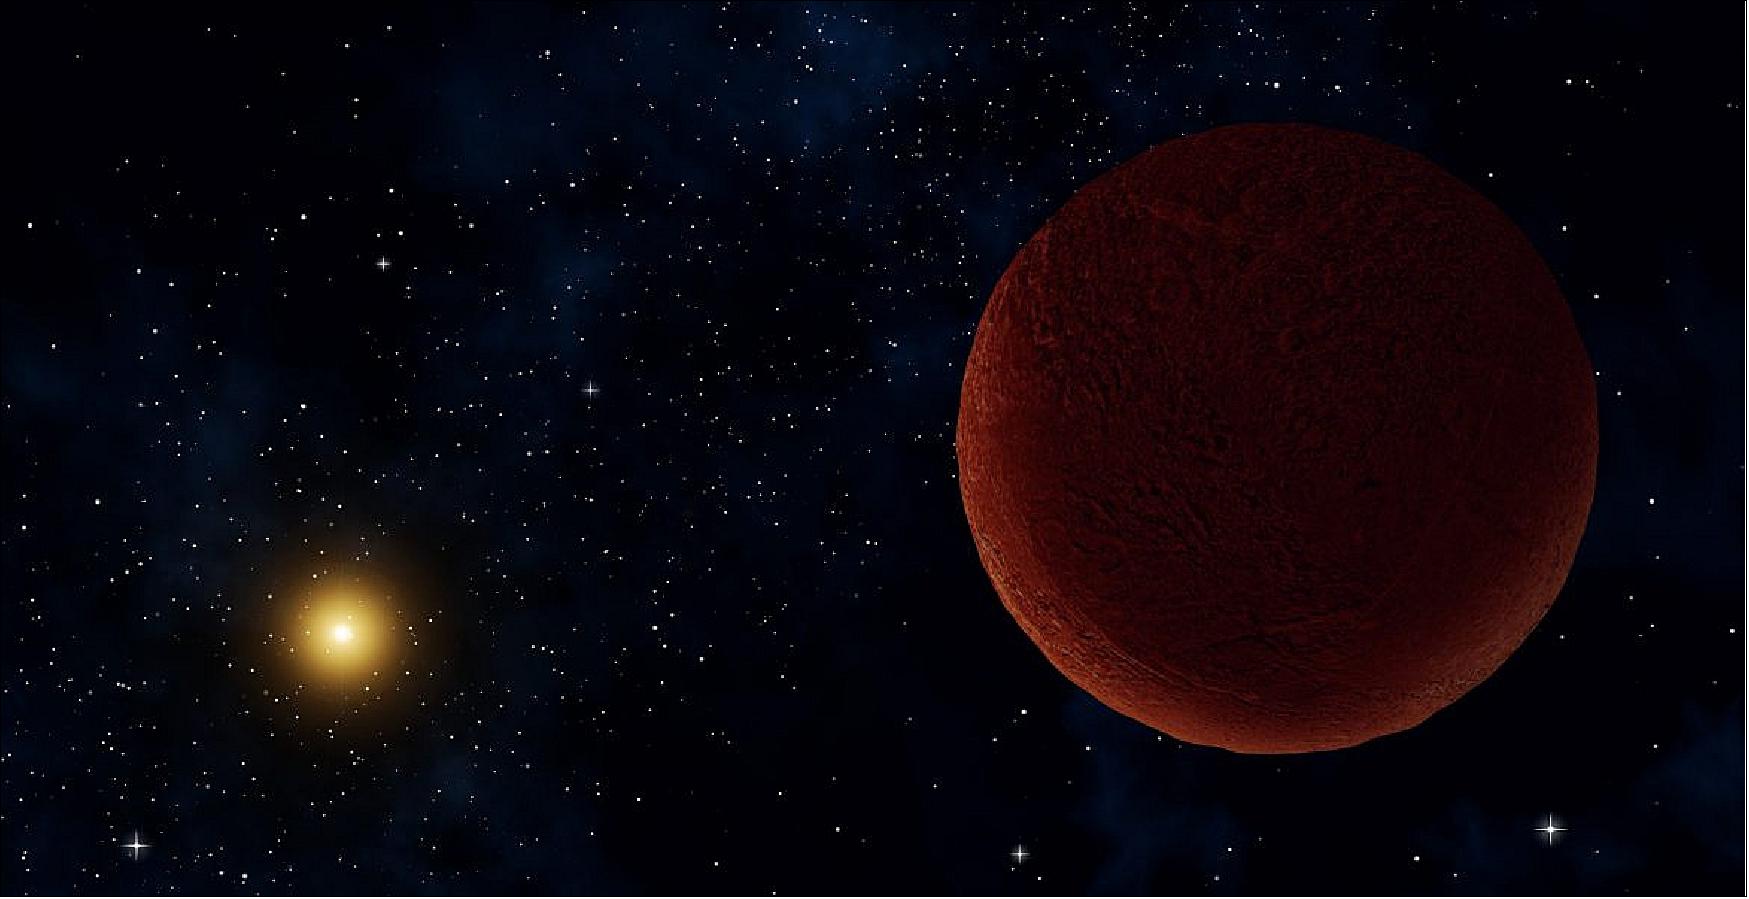 Figure 35: Artist concept of the planetary body 2014 UZ224, more informally known as DeeDee. ALMA was able to observe the faint millimeter-wavelength "glow" emitted by the object, confirming it is roughly 635 kilometers across. At this size, DeeDee should have enough mass to be spherical, the criterion necessary for astronomers to consider it a dwarf planet, though it has yet to receive that official designation (image credit: Alexandra Angelich, NRAO/AUI/NSF)